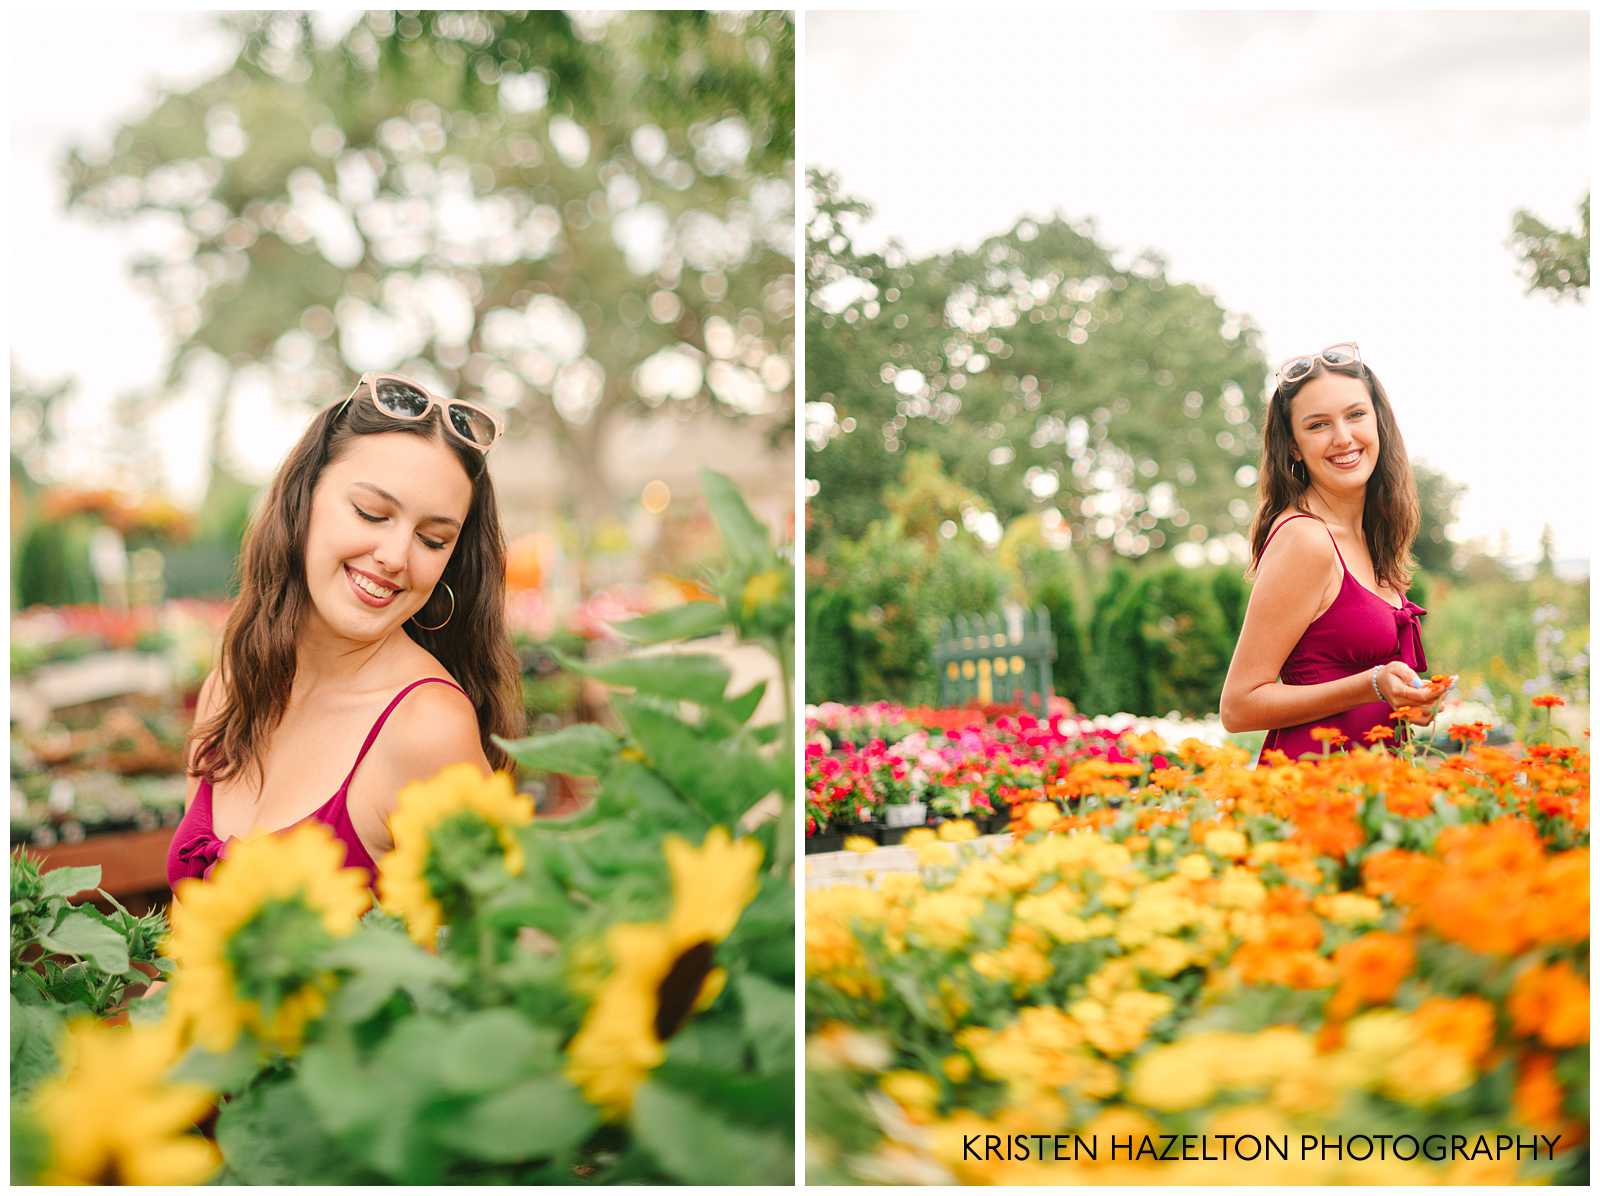 High school senior girl looking at orange and yellow sunflowers and marigolds at a garden center